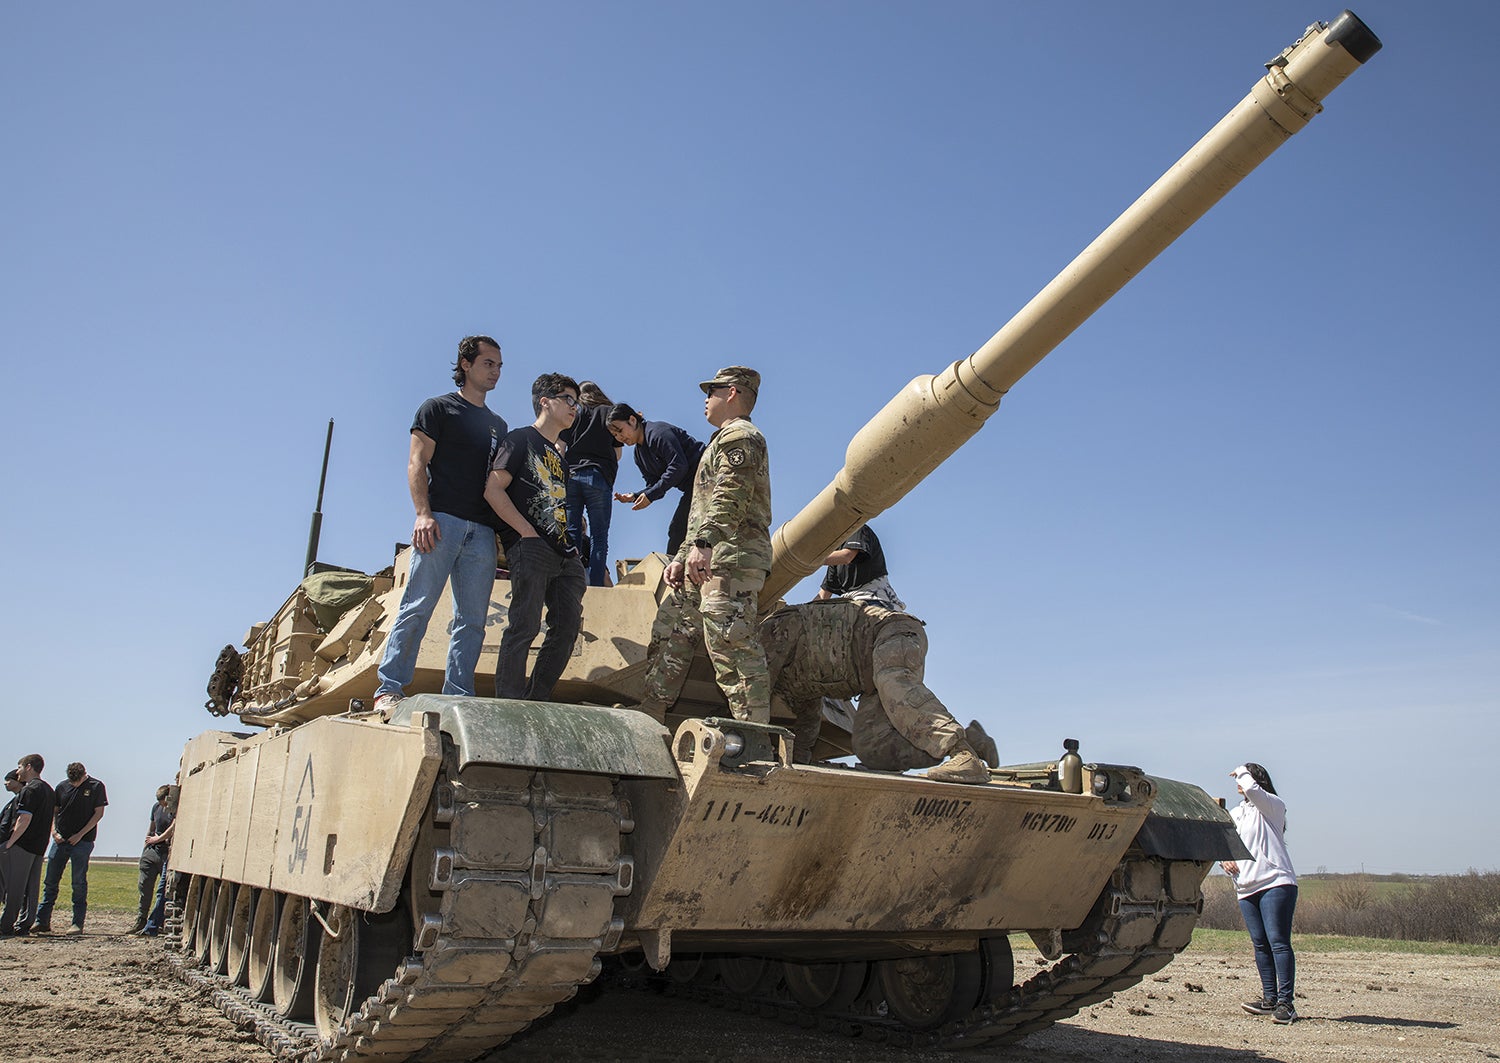 Staff Sgt. Jason Nguyen, right, a recruiter with the Kansas City Recruiting Battalion, talks to prospective soldiers about life in the Army while standing on an M1A1 Abrams tank at Fort Riley, Kansas. (U.S. Army/Sgt. Jared Simmons)